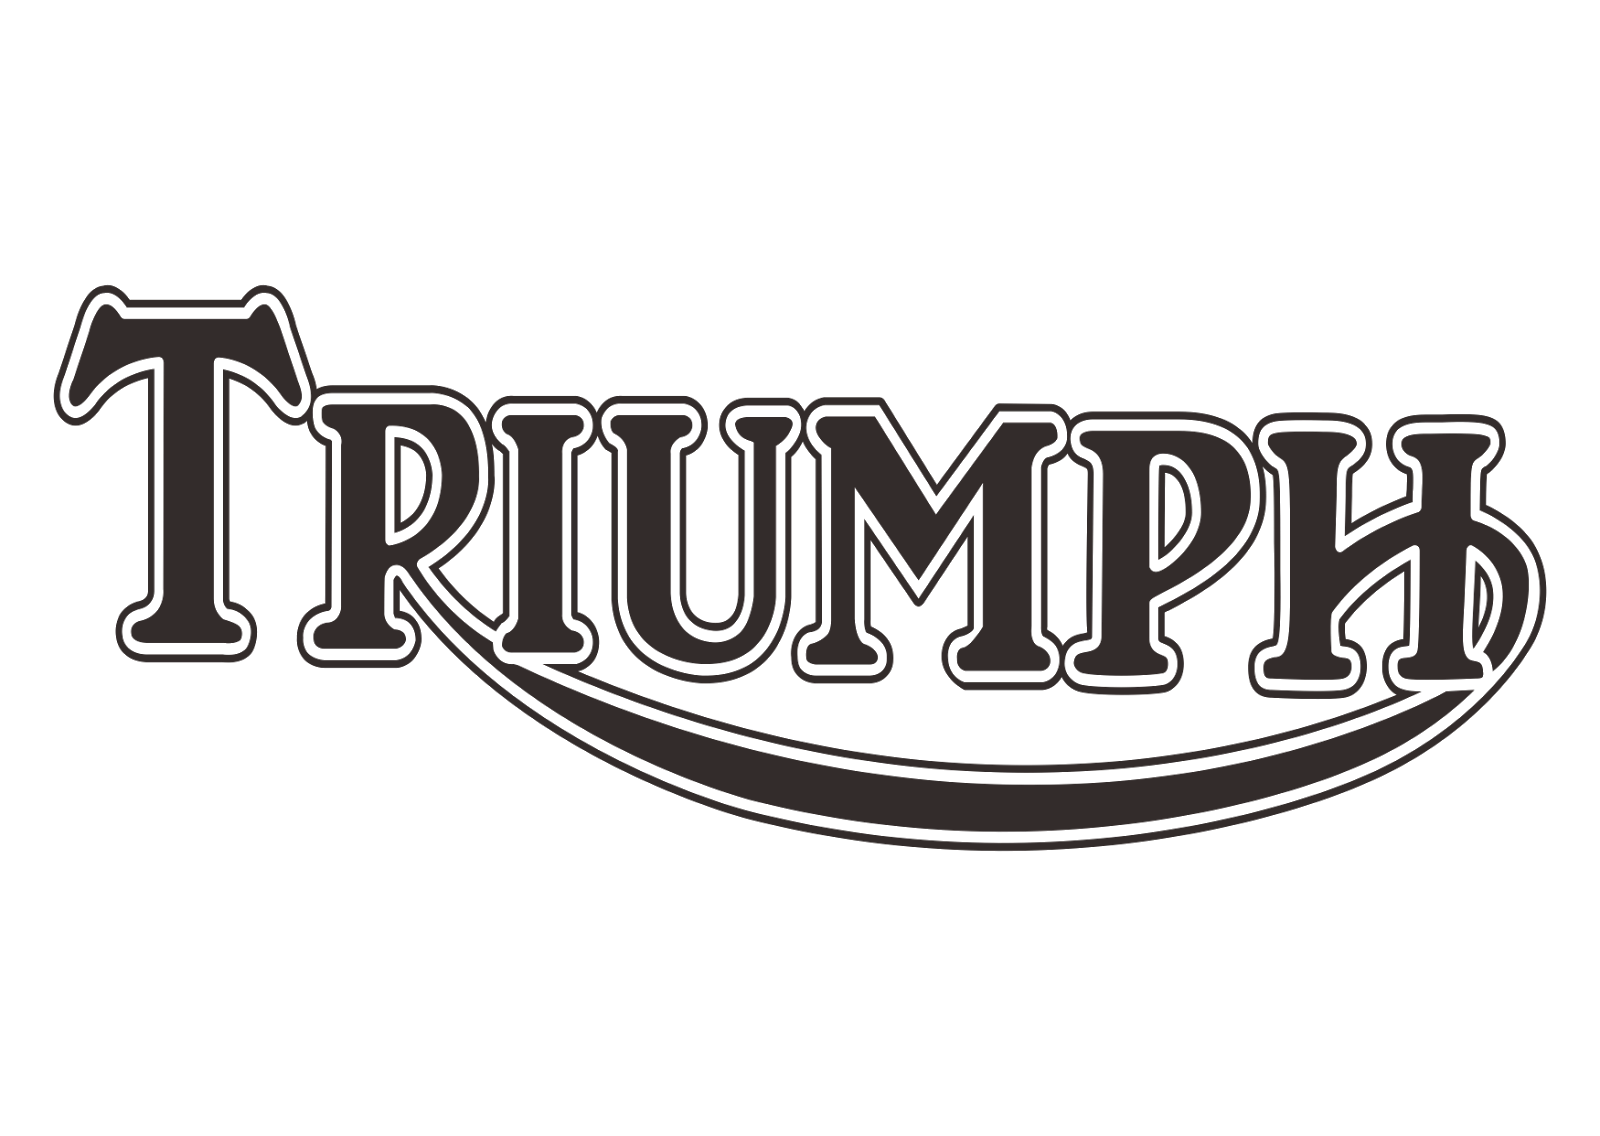 Triumph logo image in png for